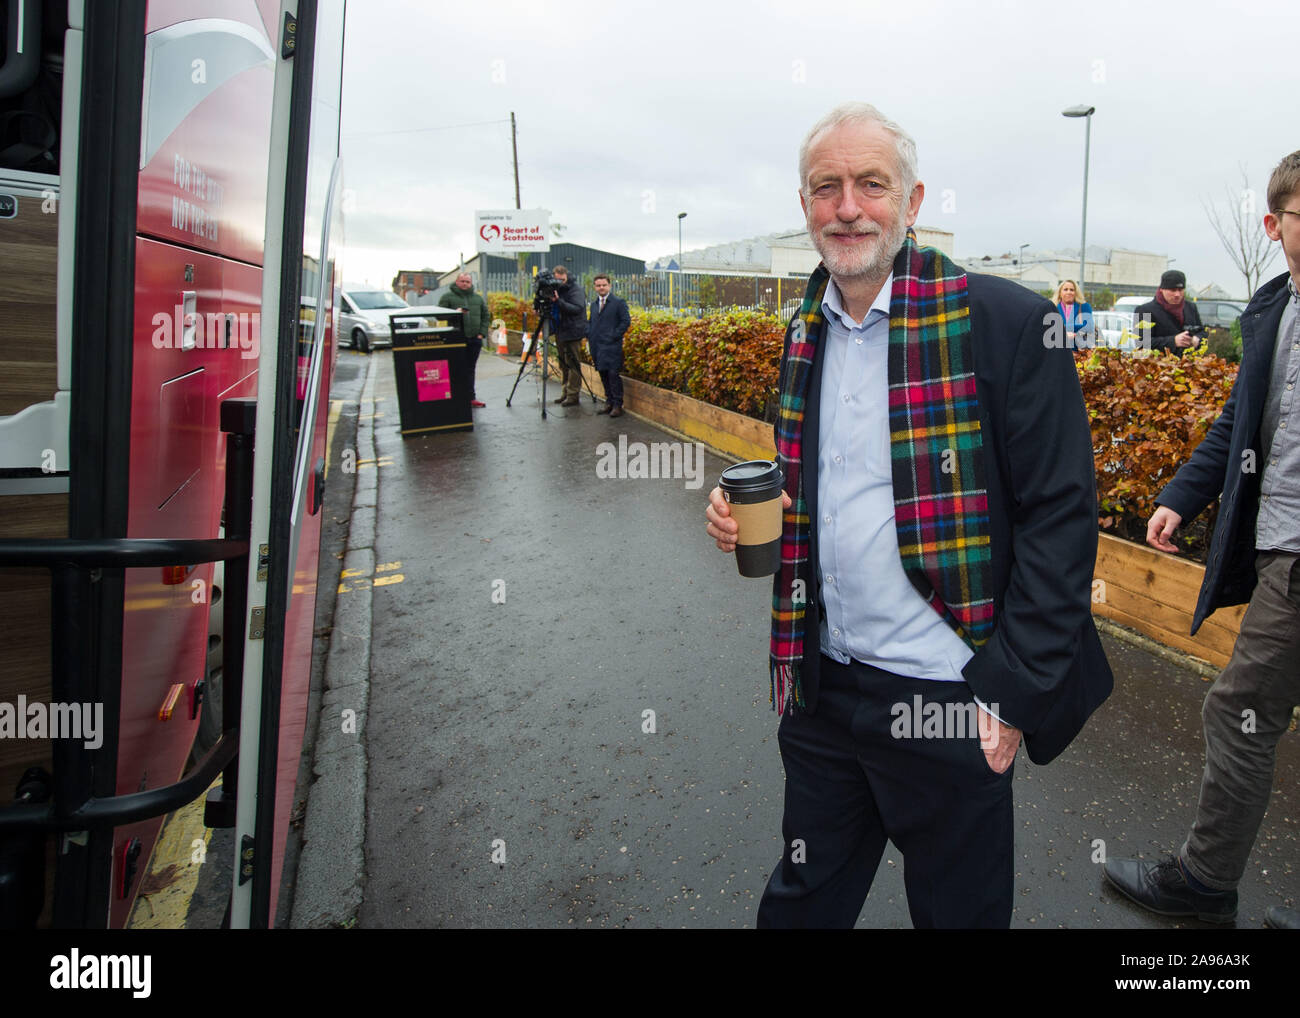 Glasgow, UK. 13th Nov, 2019. Pictured: Jeremy Corbyn MP - Leader of the Labour Party. Labour Leader Jeremy Corbyn tours key constituencies in Scotland as part of the biggest people-powered campaign in the history of our country. Jeremy Corbyn addresses Labour activists and campaign across key seats in Scotland alongside Scottish Labour candidates. Credit: Colin Fisher/Alamy Live News Stock Photo